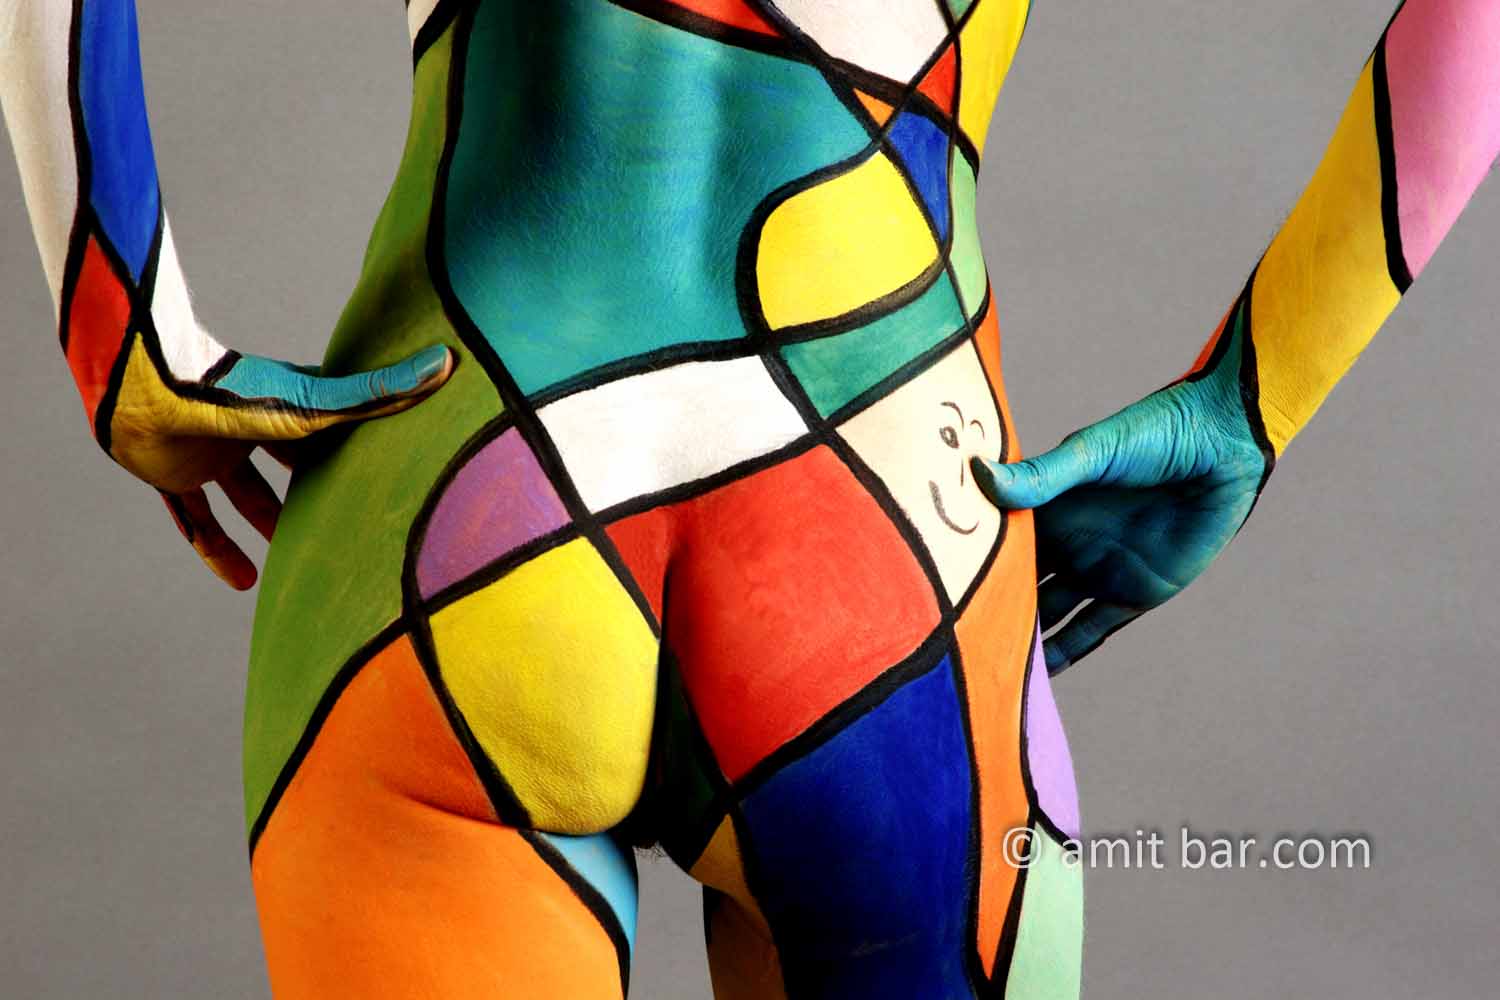 Color and lines I: Body-painted model with bordered colored patches